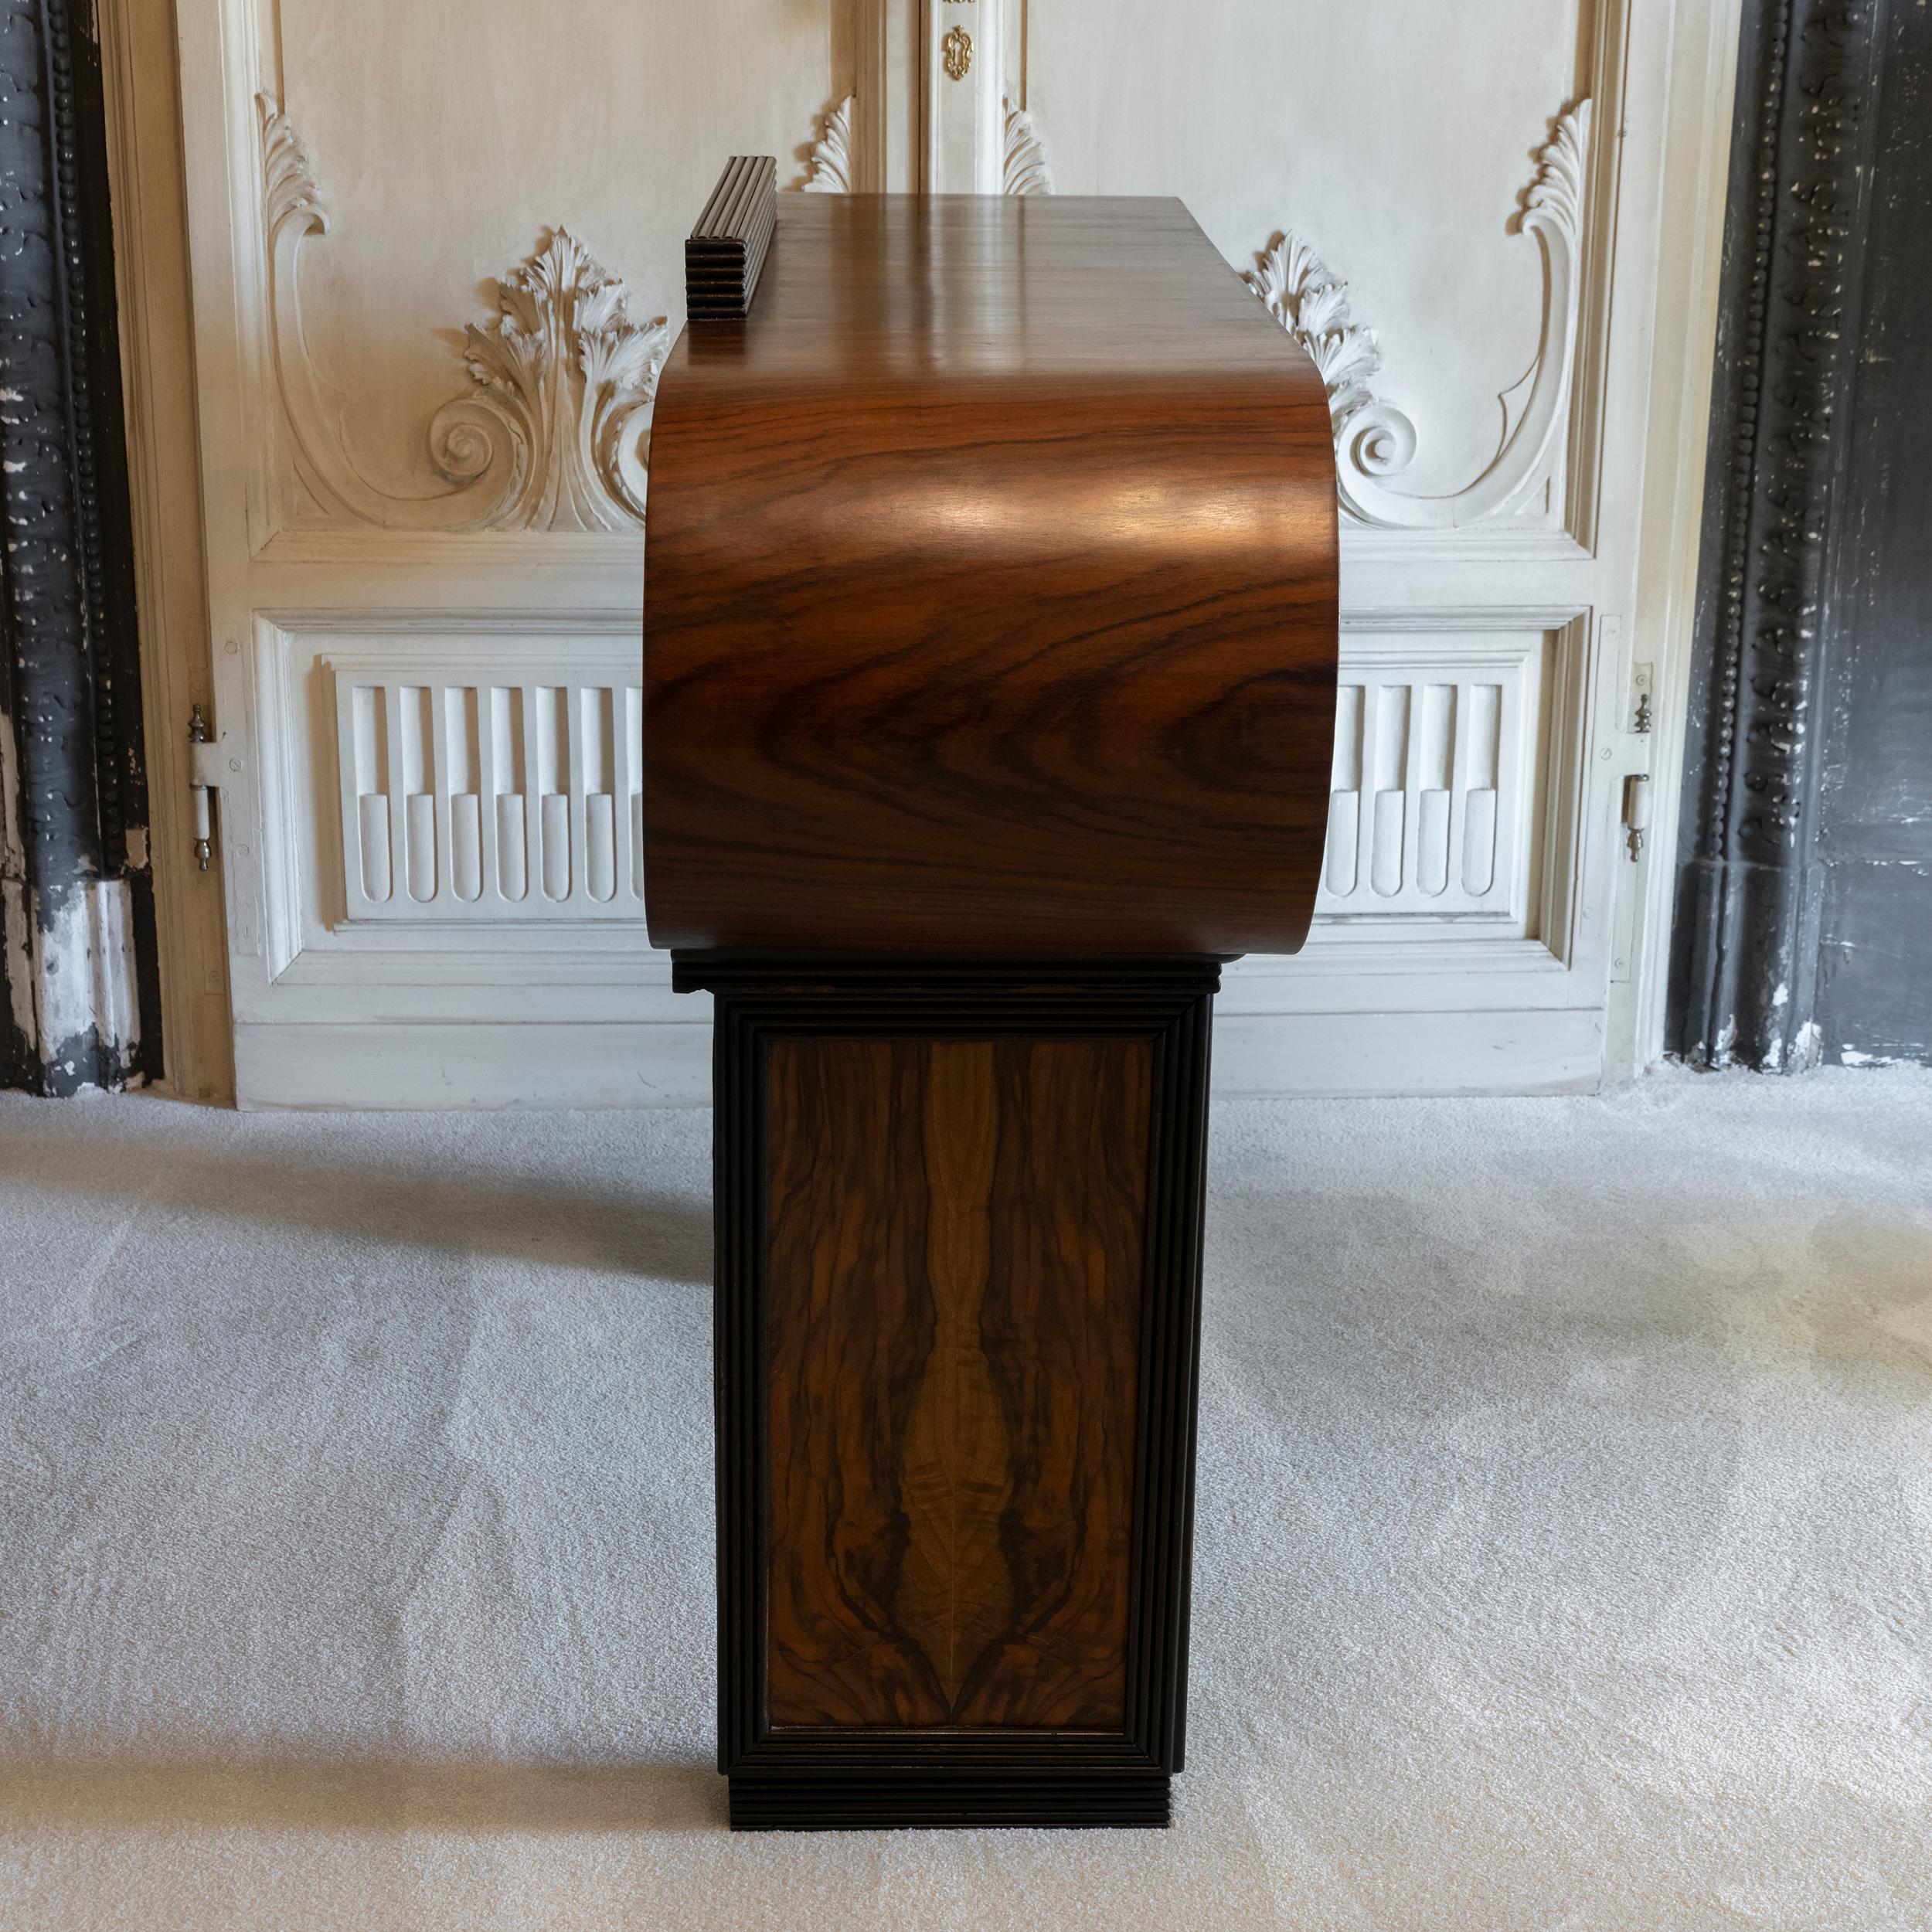 1930s Italian Deco Console Table with Drawers Palisander, Mahogany and Walnut In Good Condition For Sale In Firenze, IT